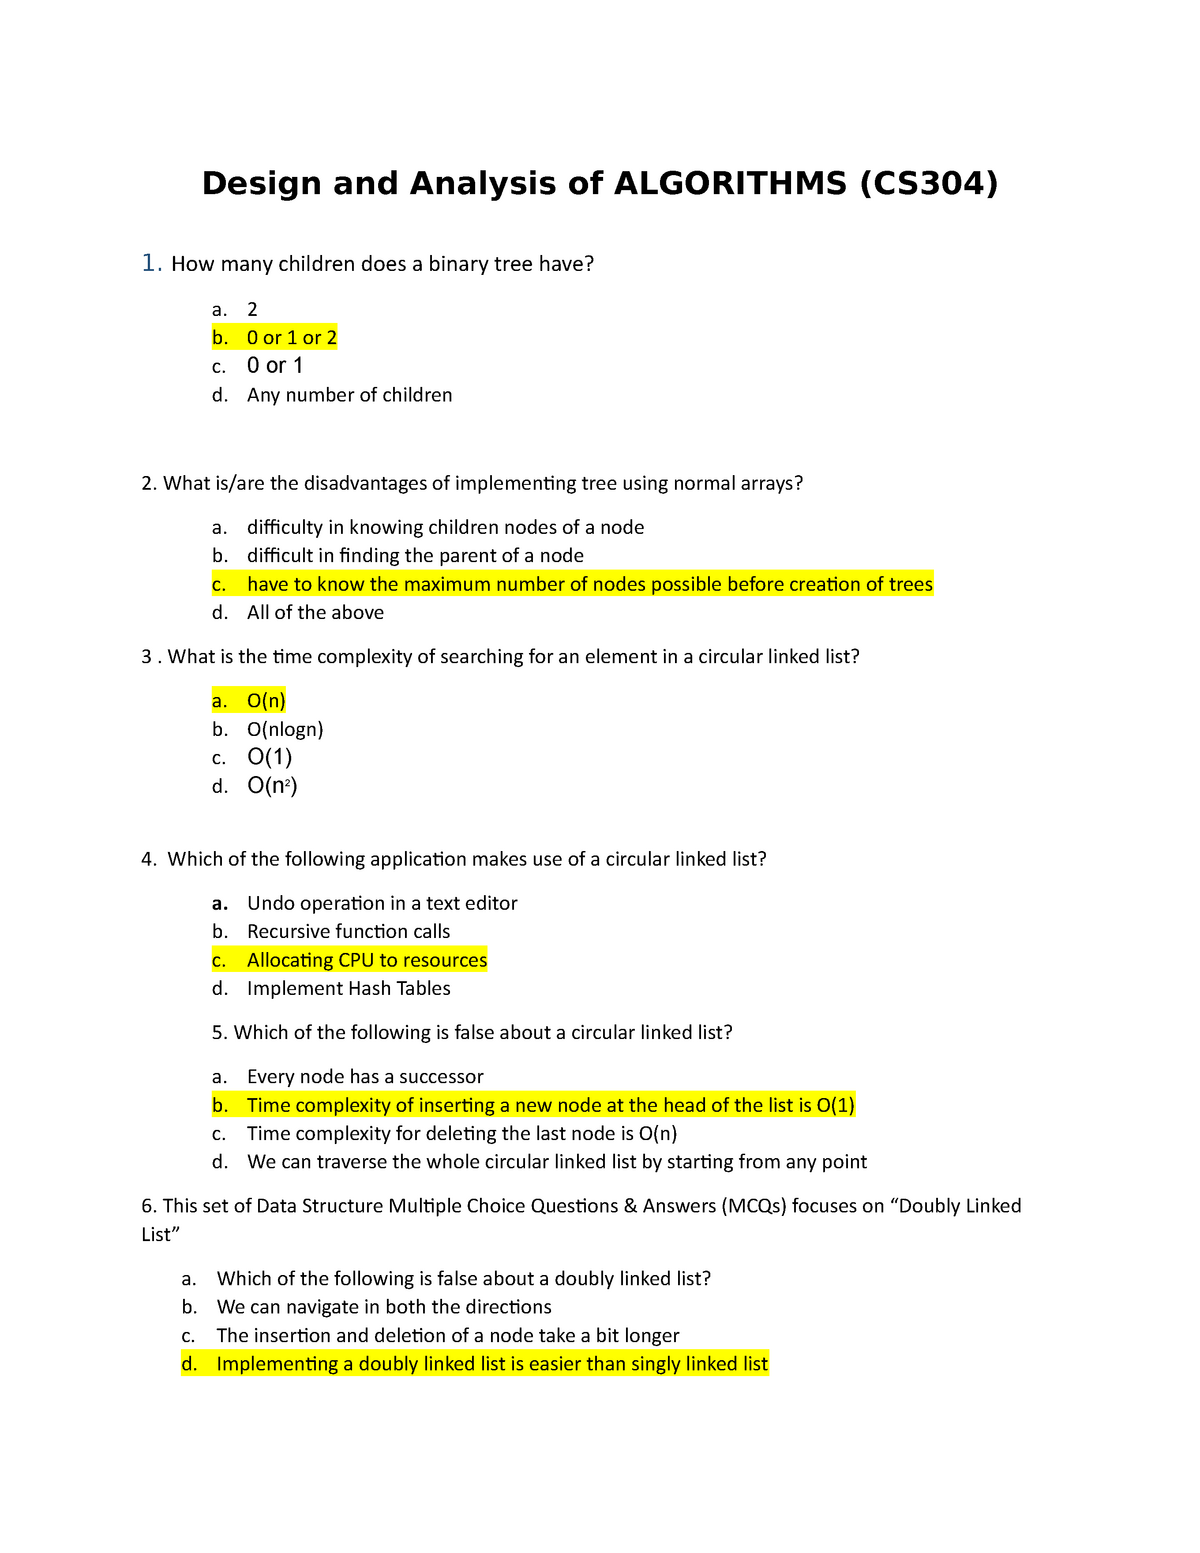 design-and-analysis-of-algorithms-quiz-1-design-and-analysis-of